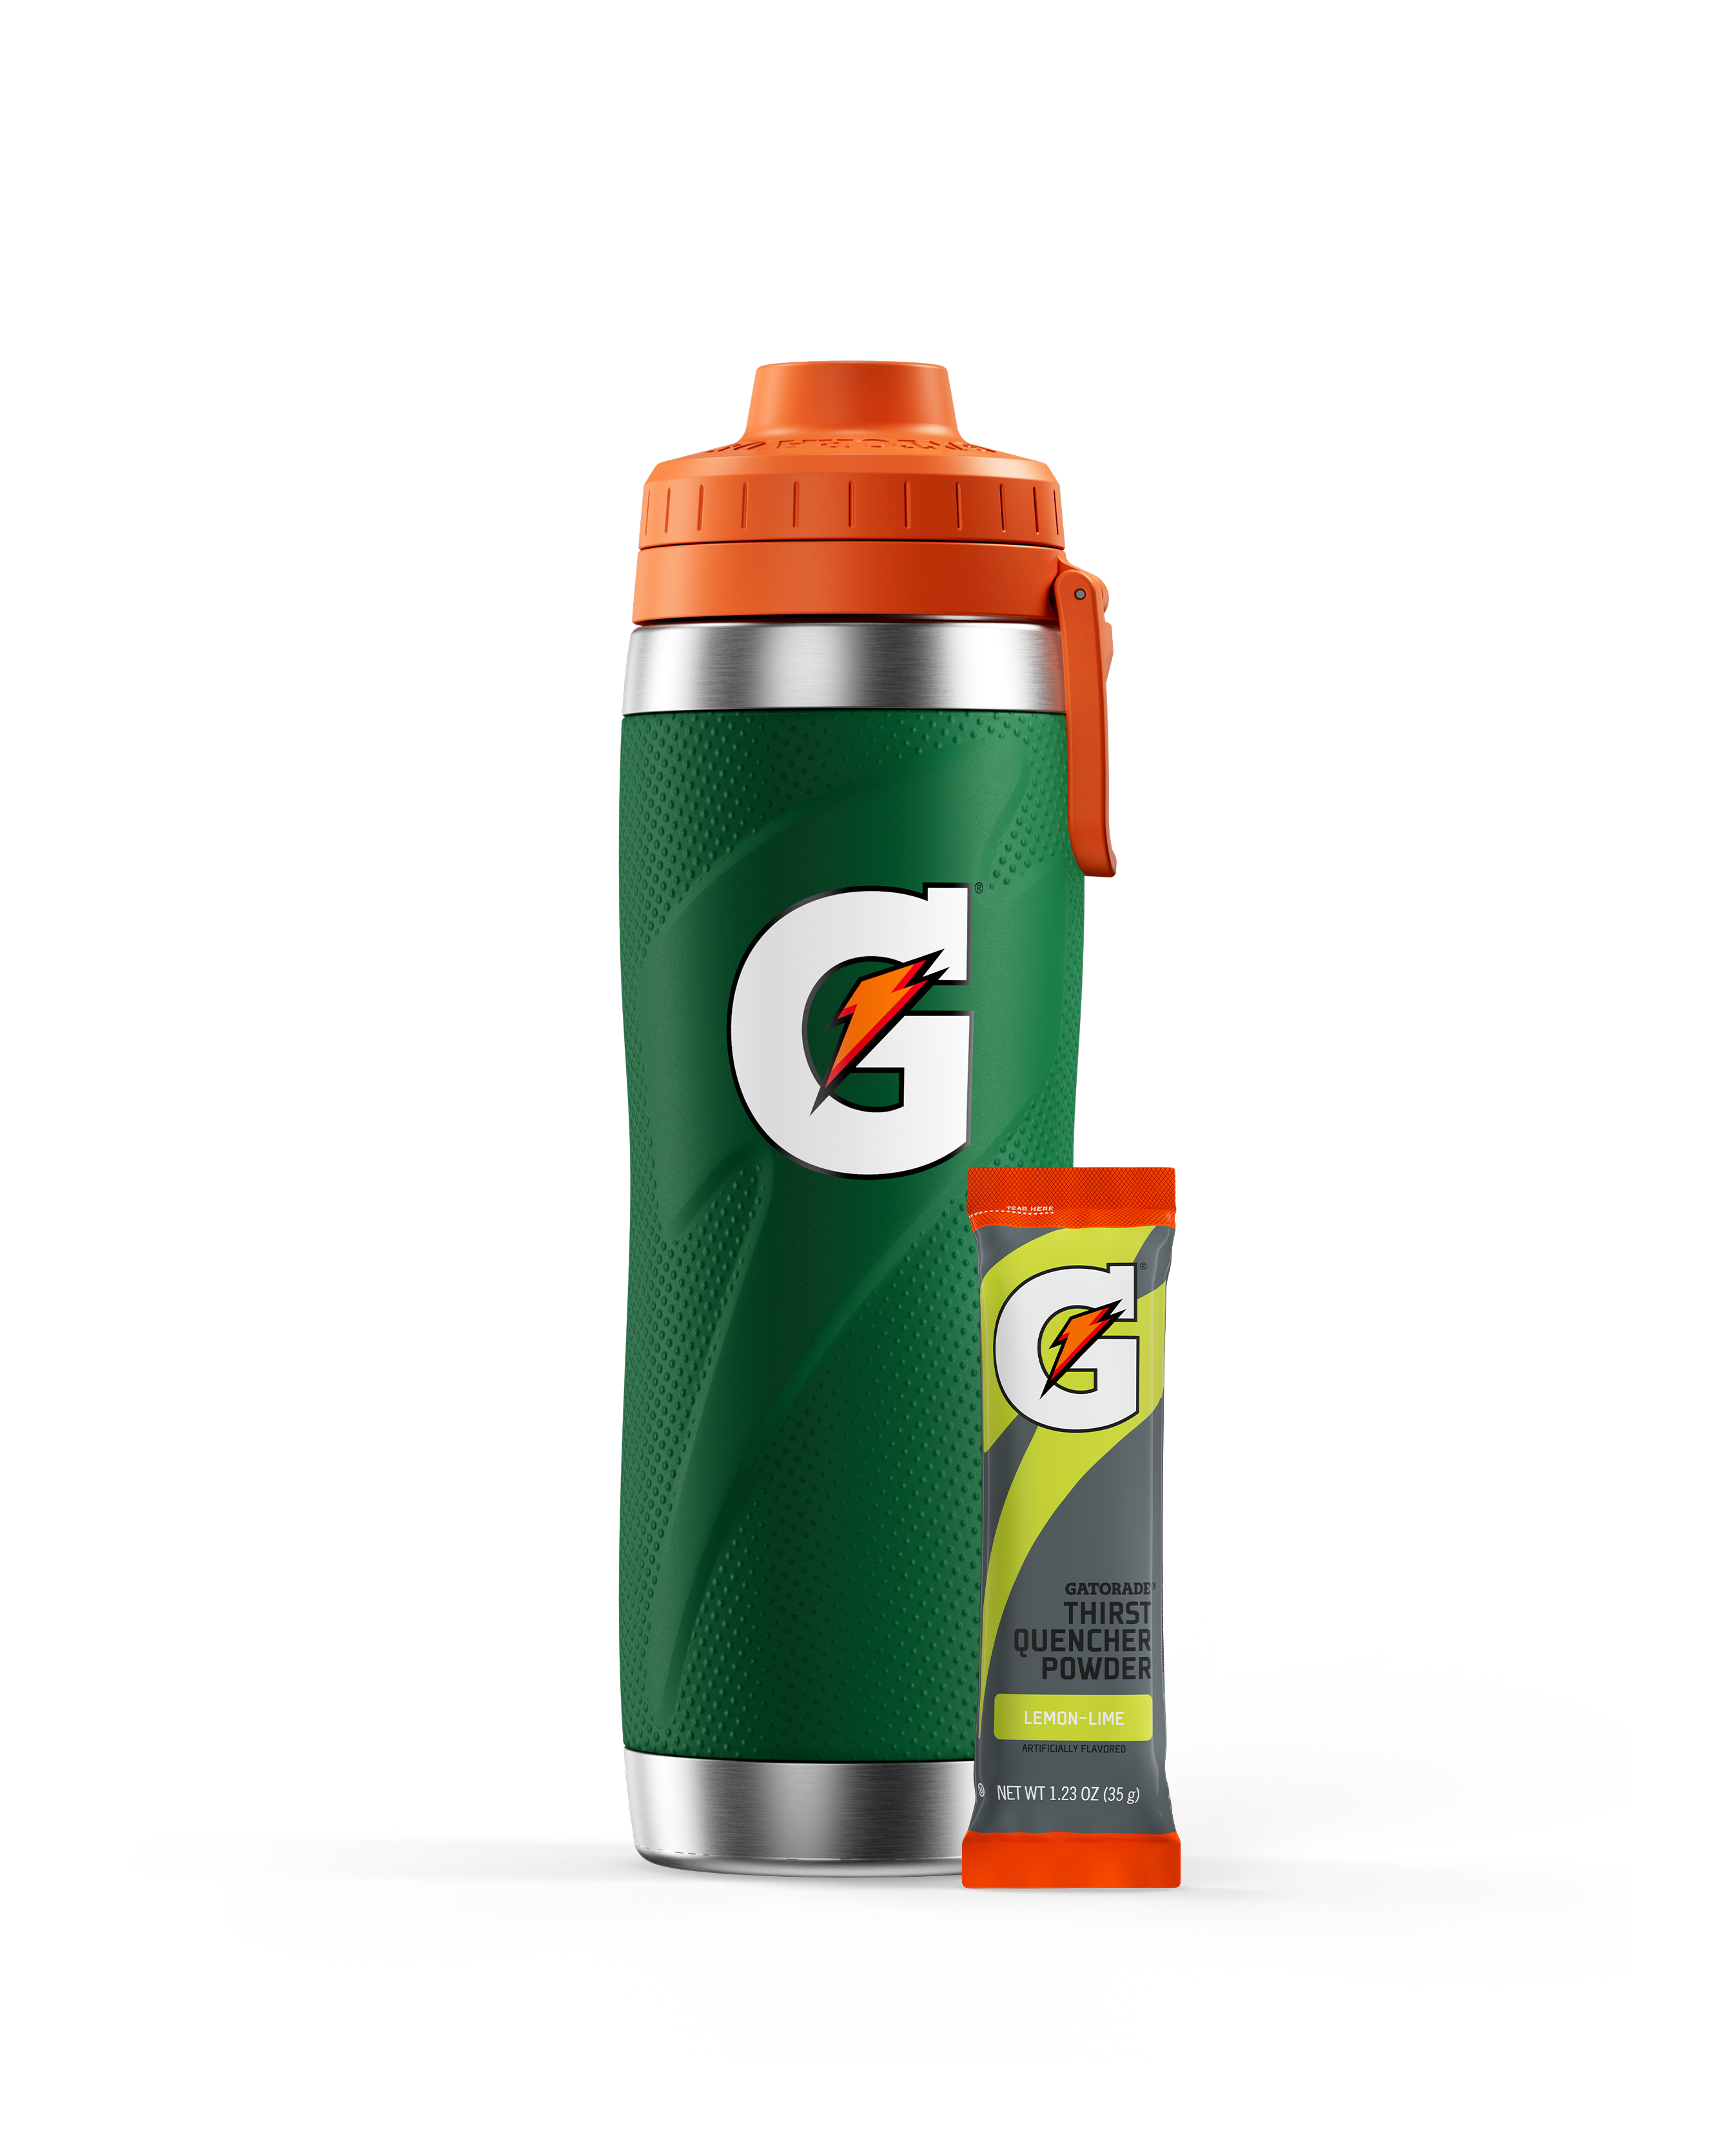 Stainless Steel Bottle Green with Gatorade Thirst Quencher Powder Lemon-Lime